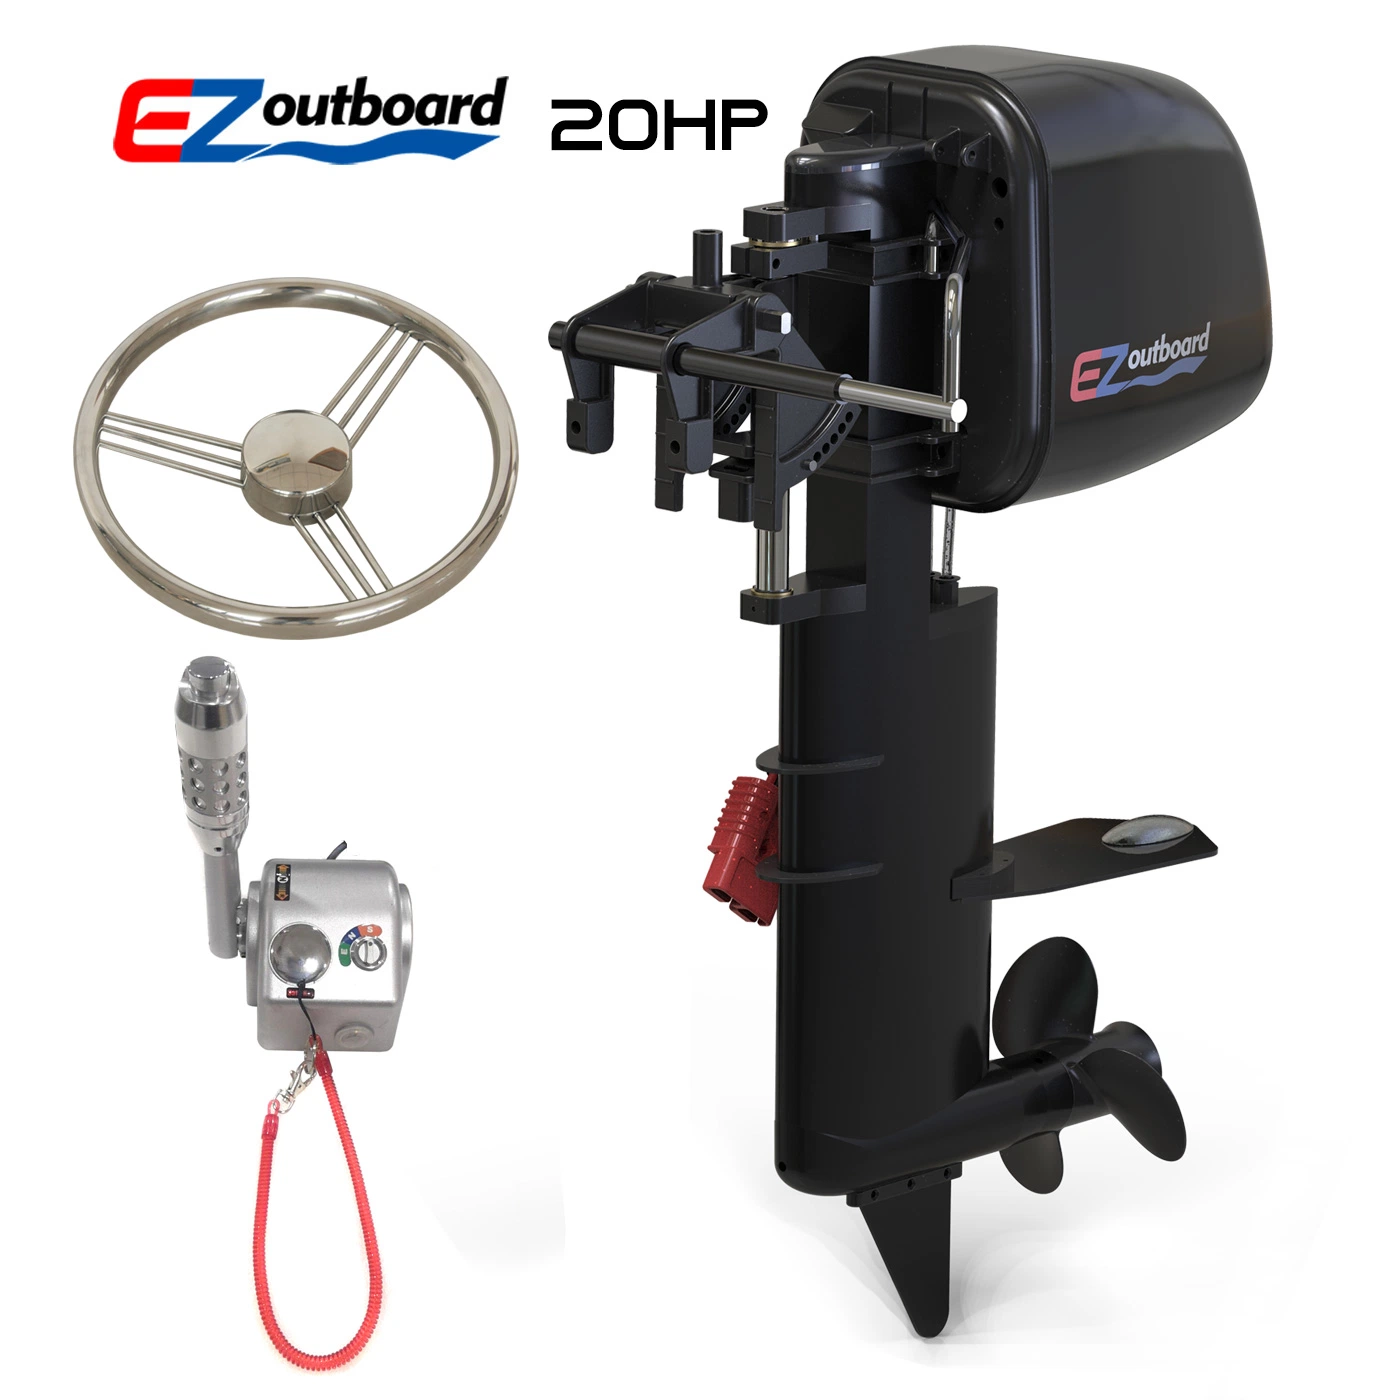 Remote and Tiller New EZ Outboard sport version 6HP 10HP 20HP Electric Propulsion Outboard Motor for Boat and ship (EZ-S20 Tiller or Remote ) with CE certificat